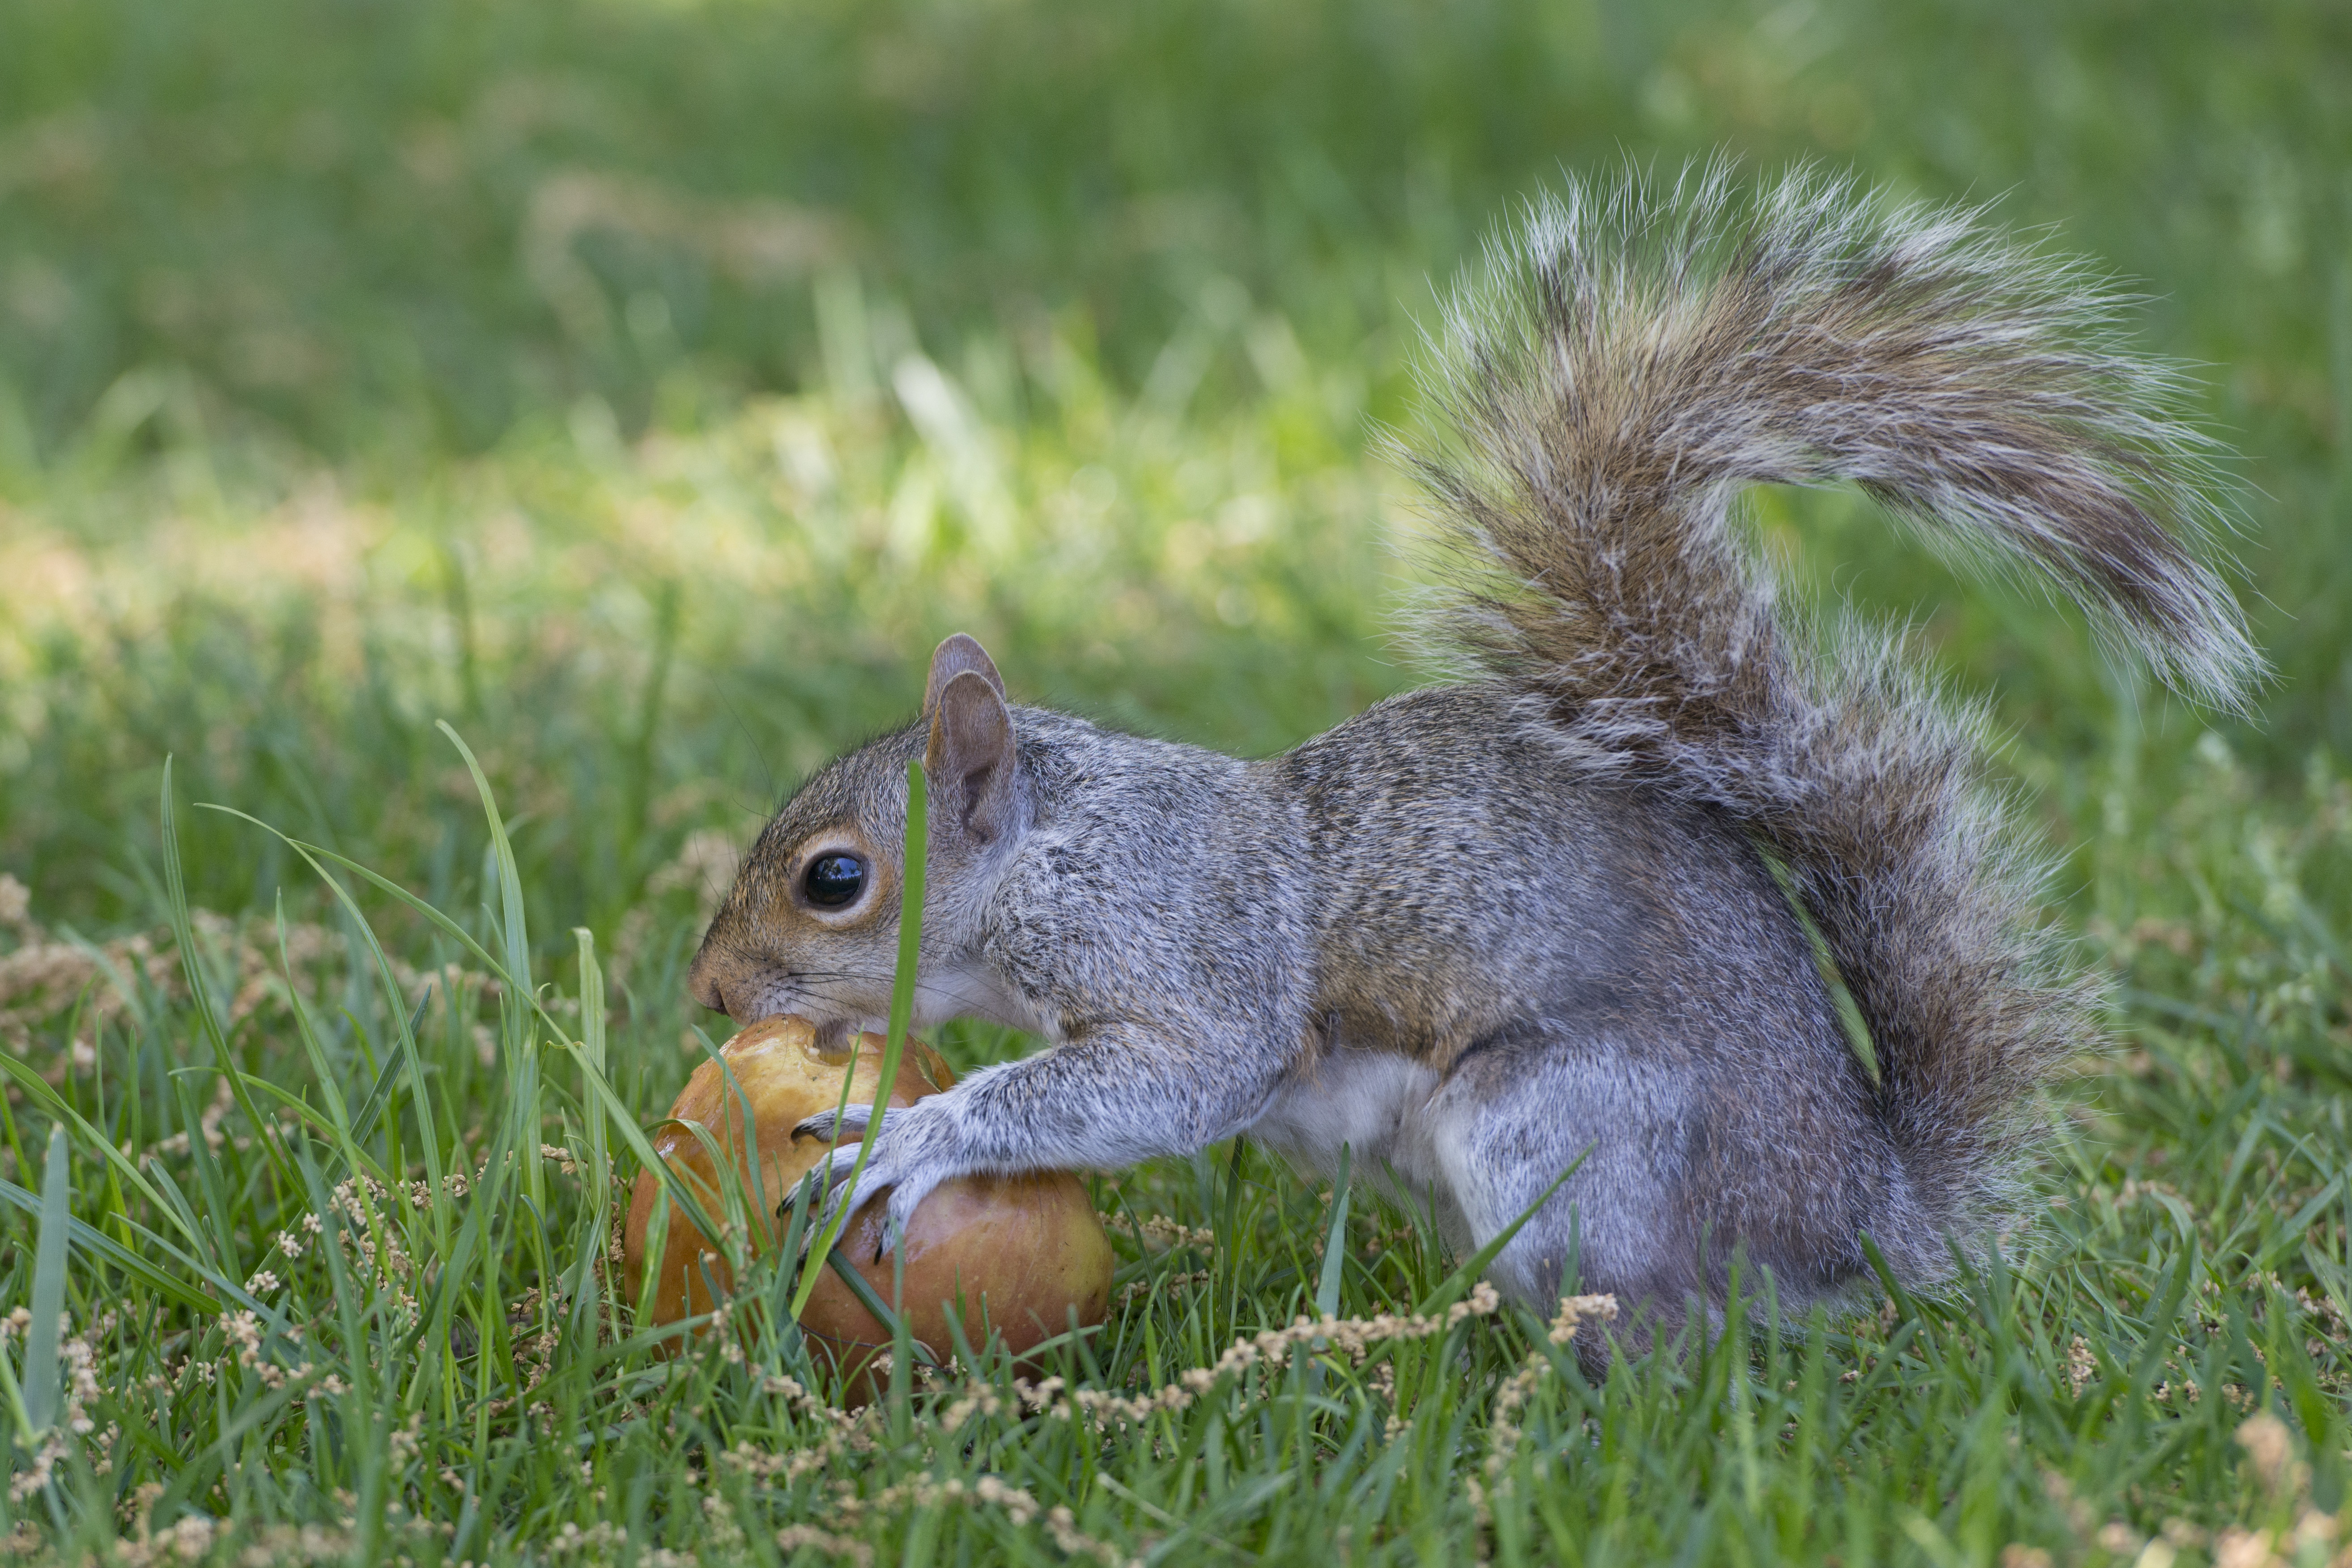  A grey squirrel eating an apple in grass